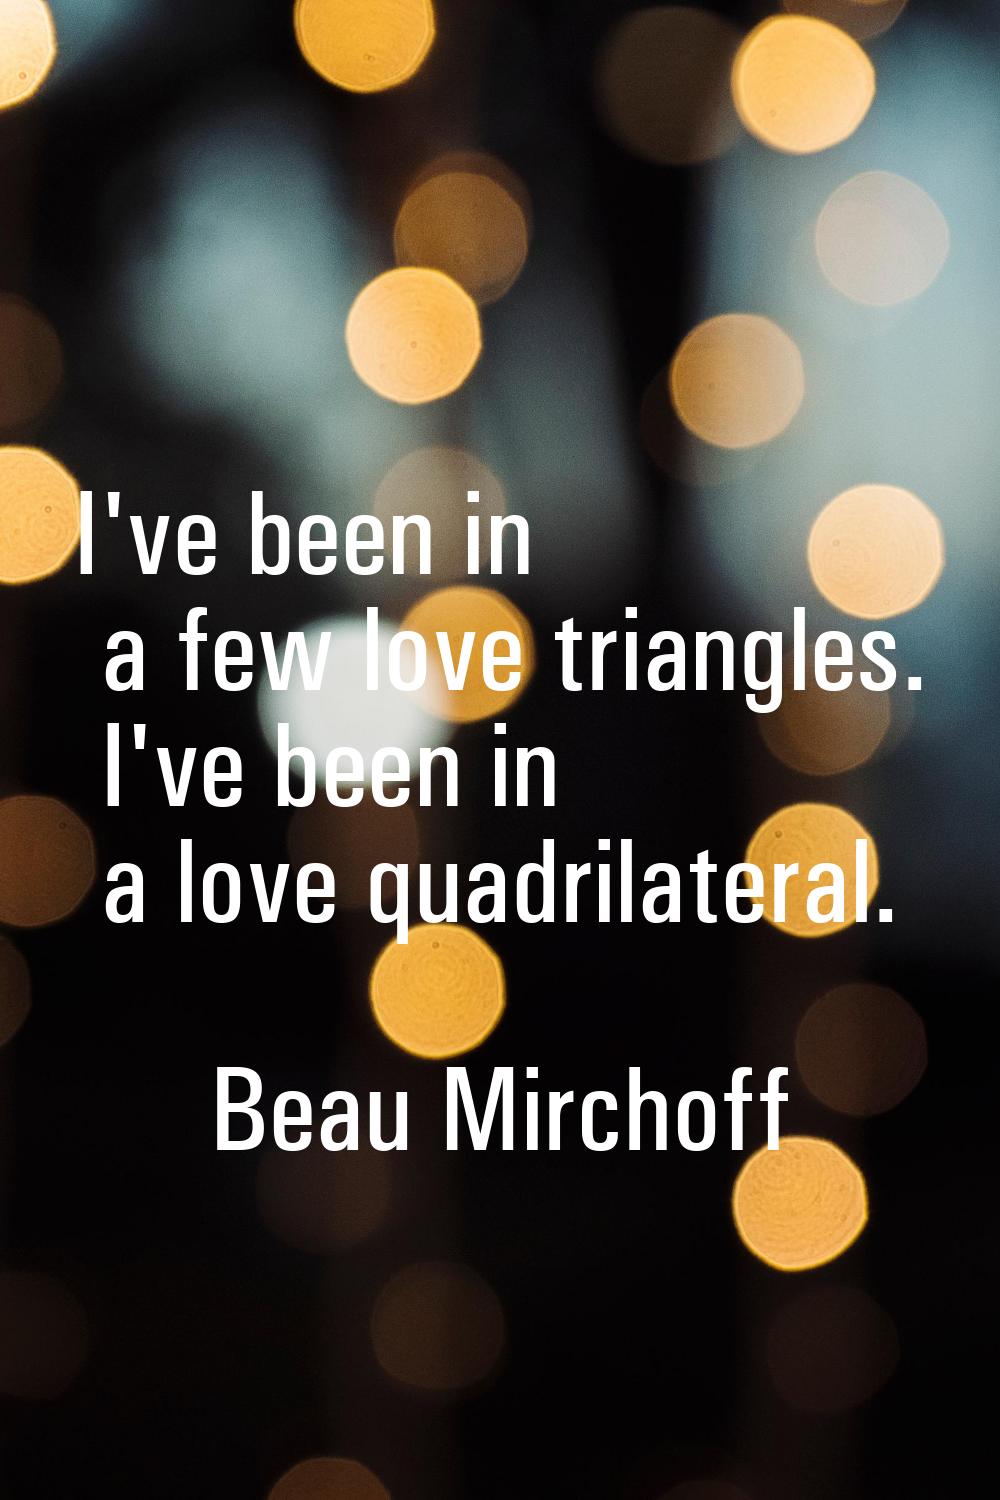 I've been in a few love triangles. I've been in a love quadrilateral.